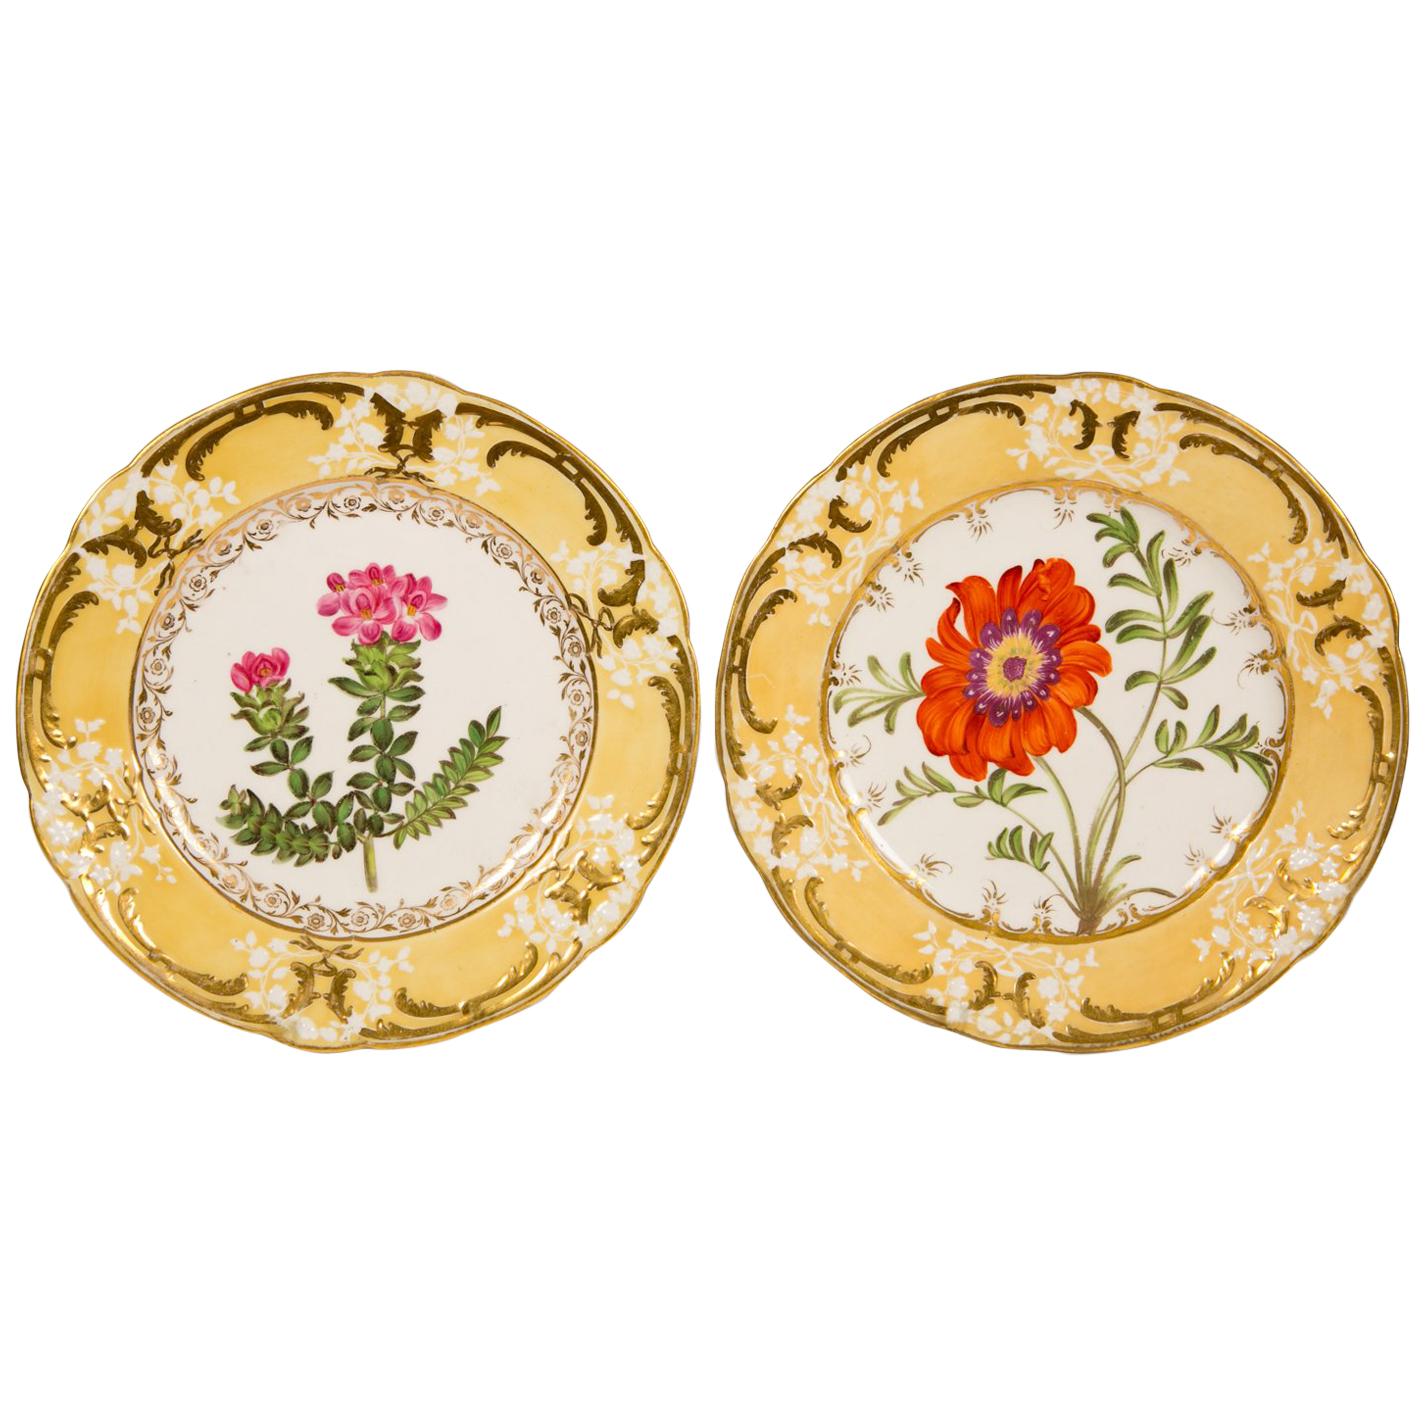 Pair of Antique Dishes with Single Hand-Painted Flower circa 1825